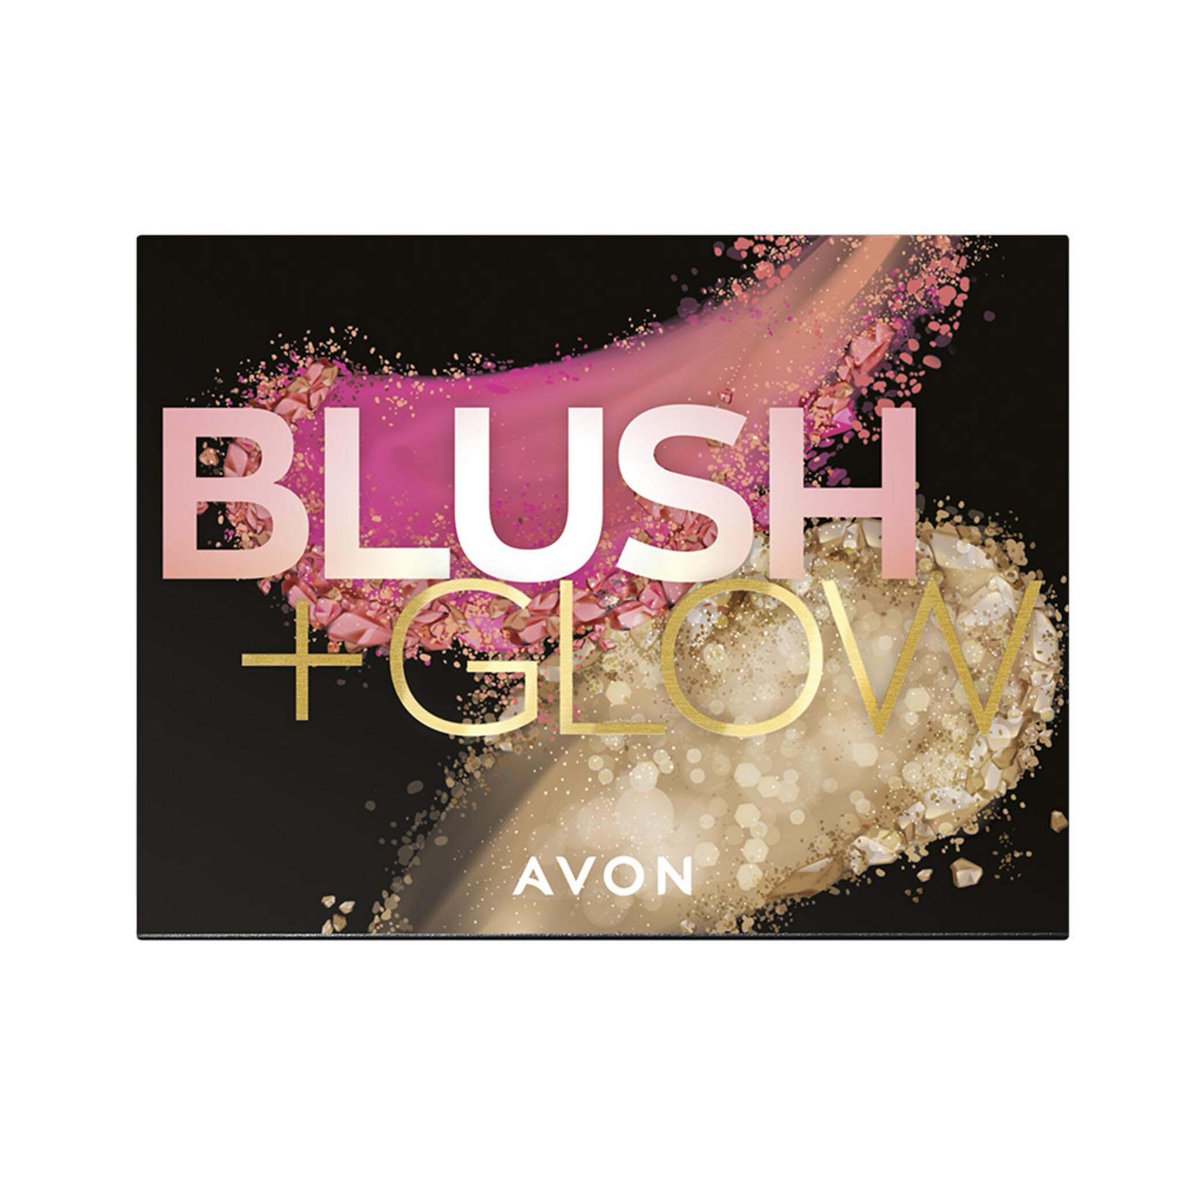 An all-purpose palette is such a must have, especially if you love to take your make-up out and don't want tons of products rattling around in your bag.

wu.to/woOx6C
#Palette #ContourAndHighlight #Blush #Avon